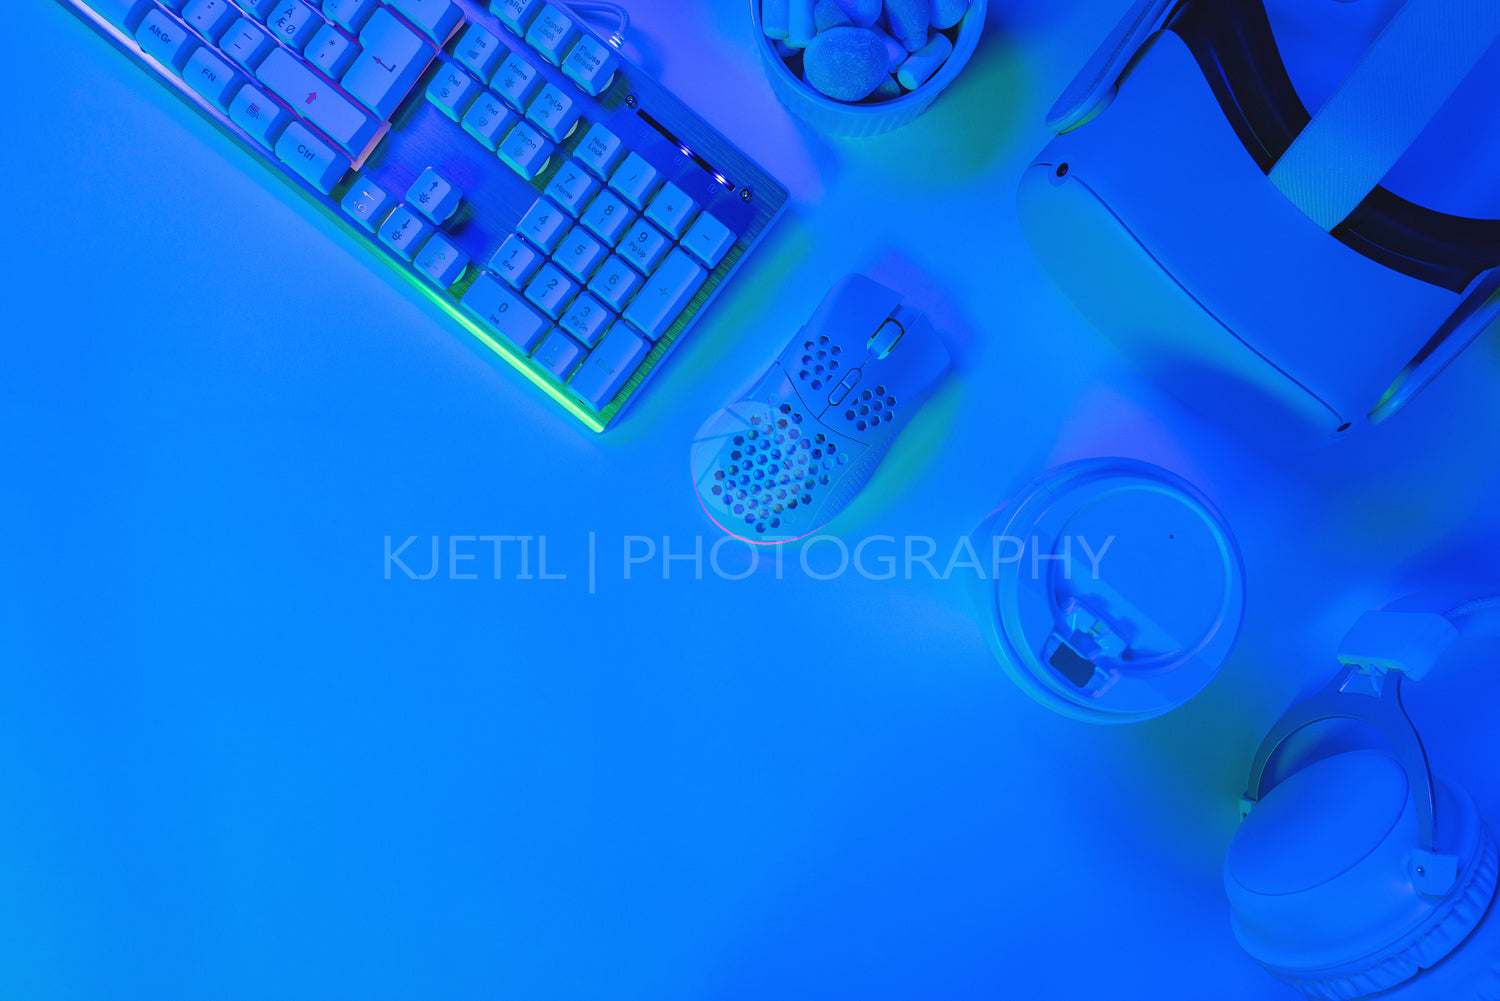 Keyboard with mouse and disposable cup